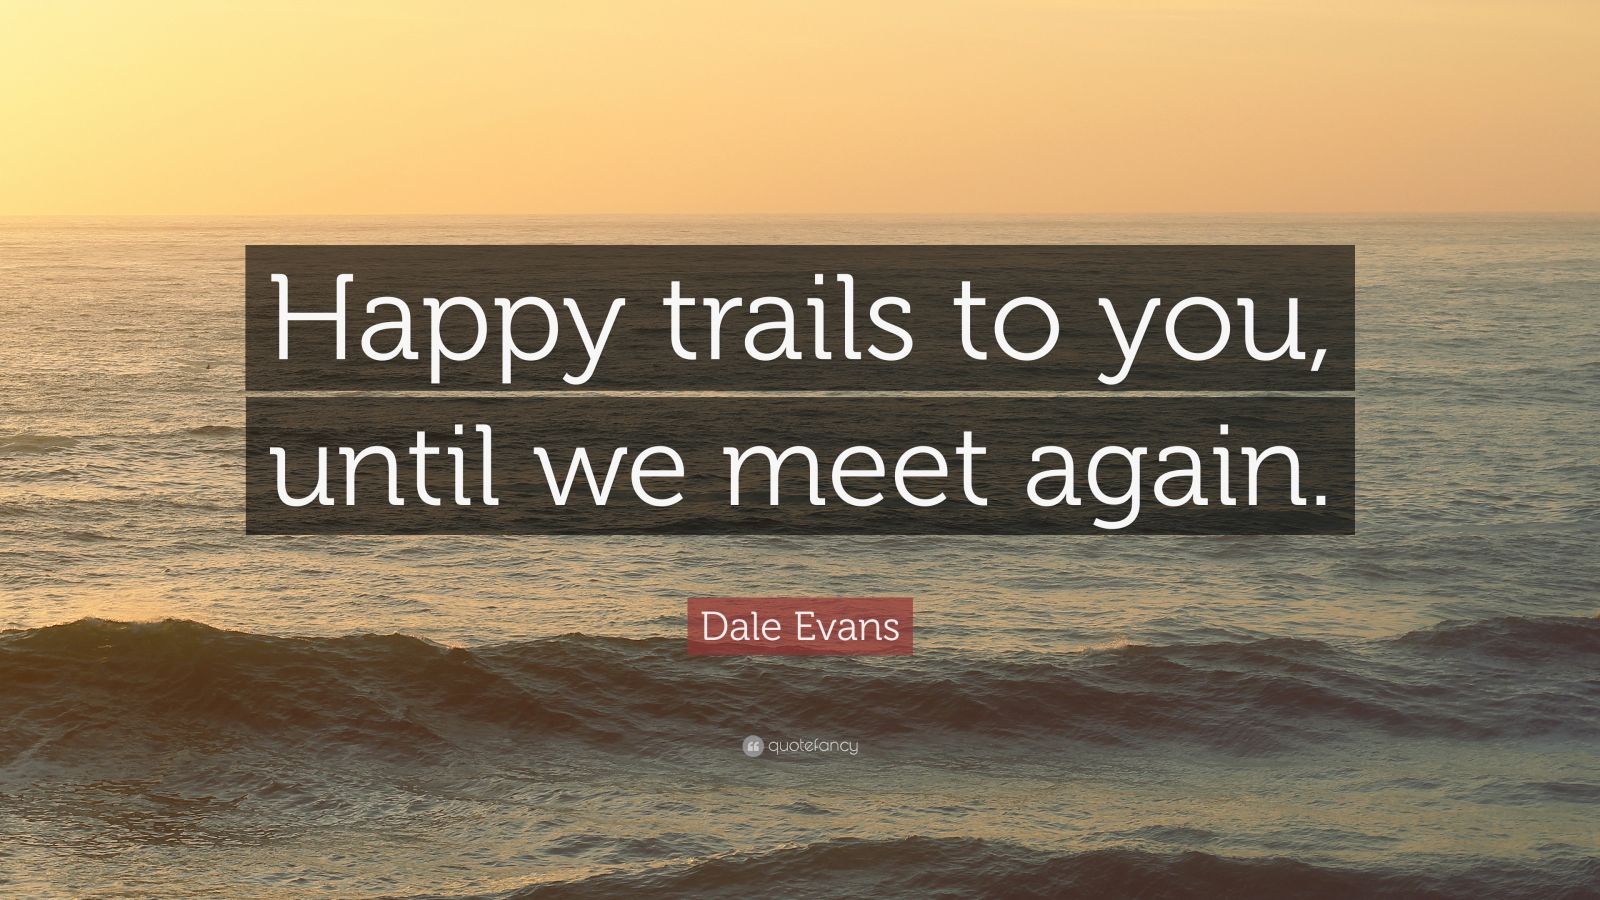 dale-evans-quote-happy-trails-to-you-until-we-meet-again-12